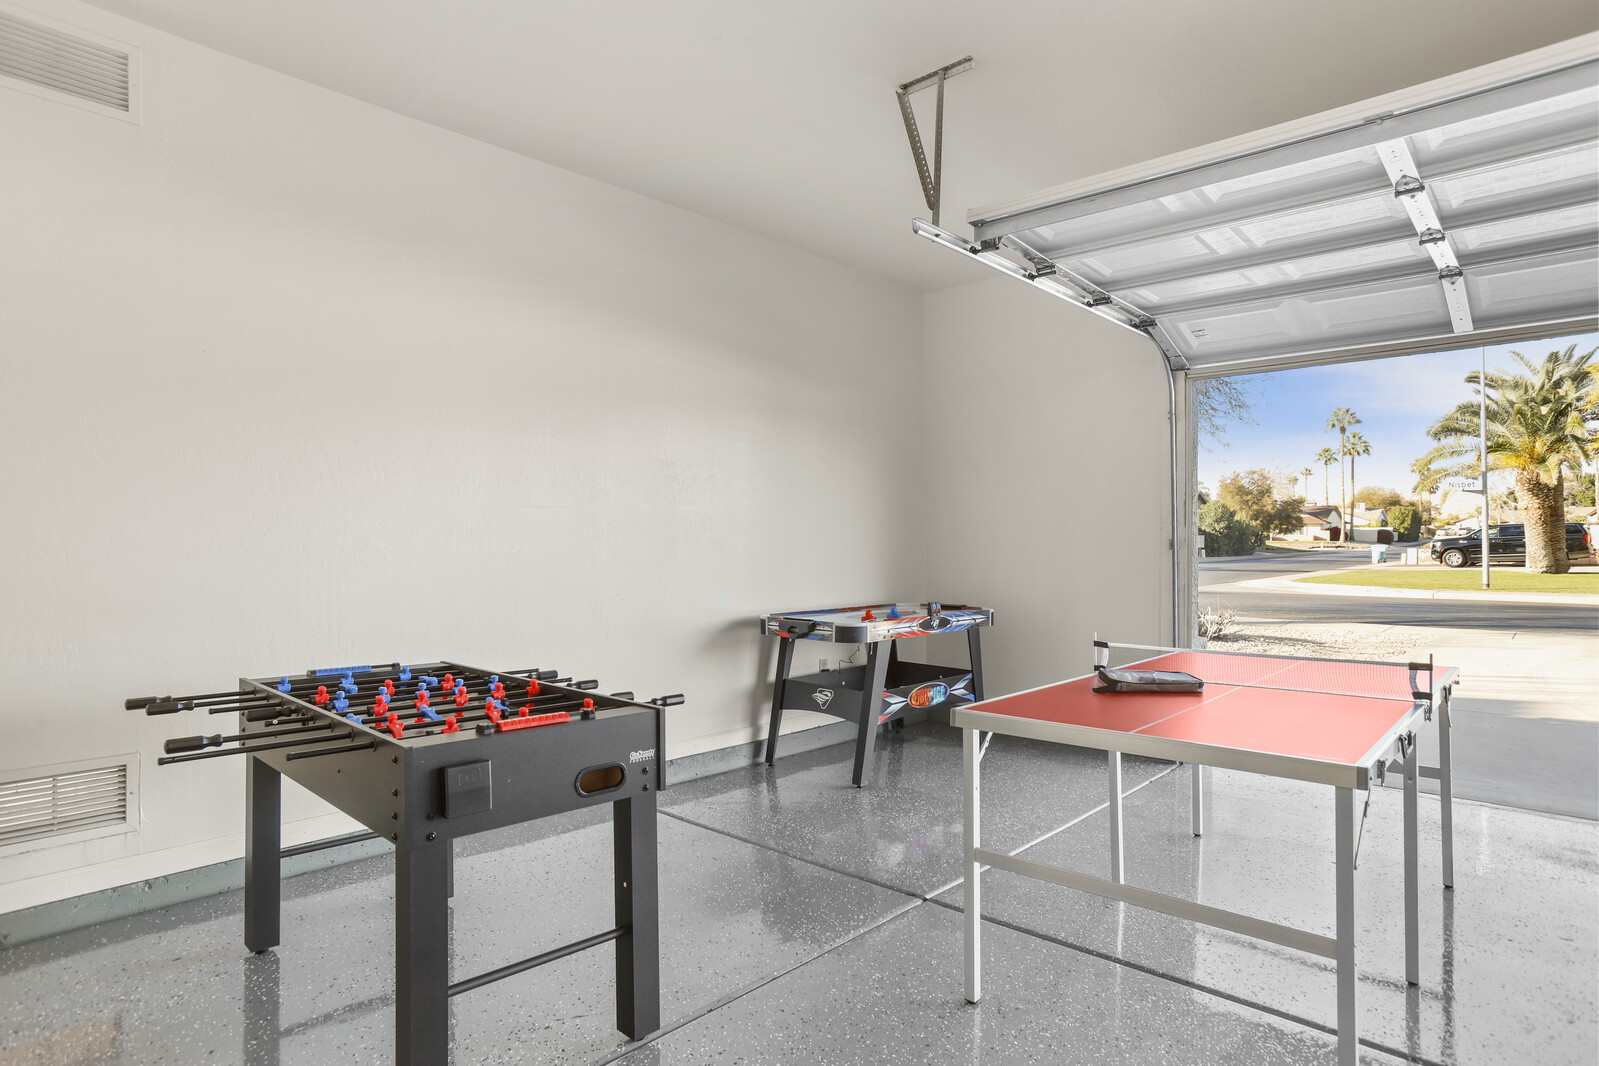 Garage is converted into game room w/ Foosball, Ping Pong Table & Air Hockey